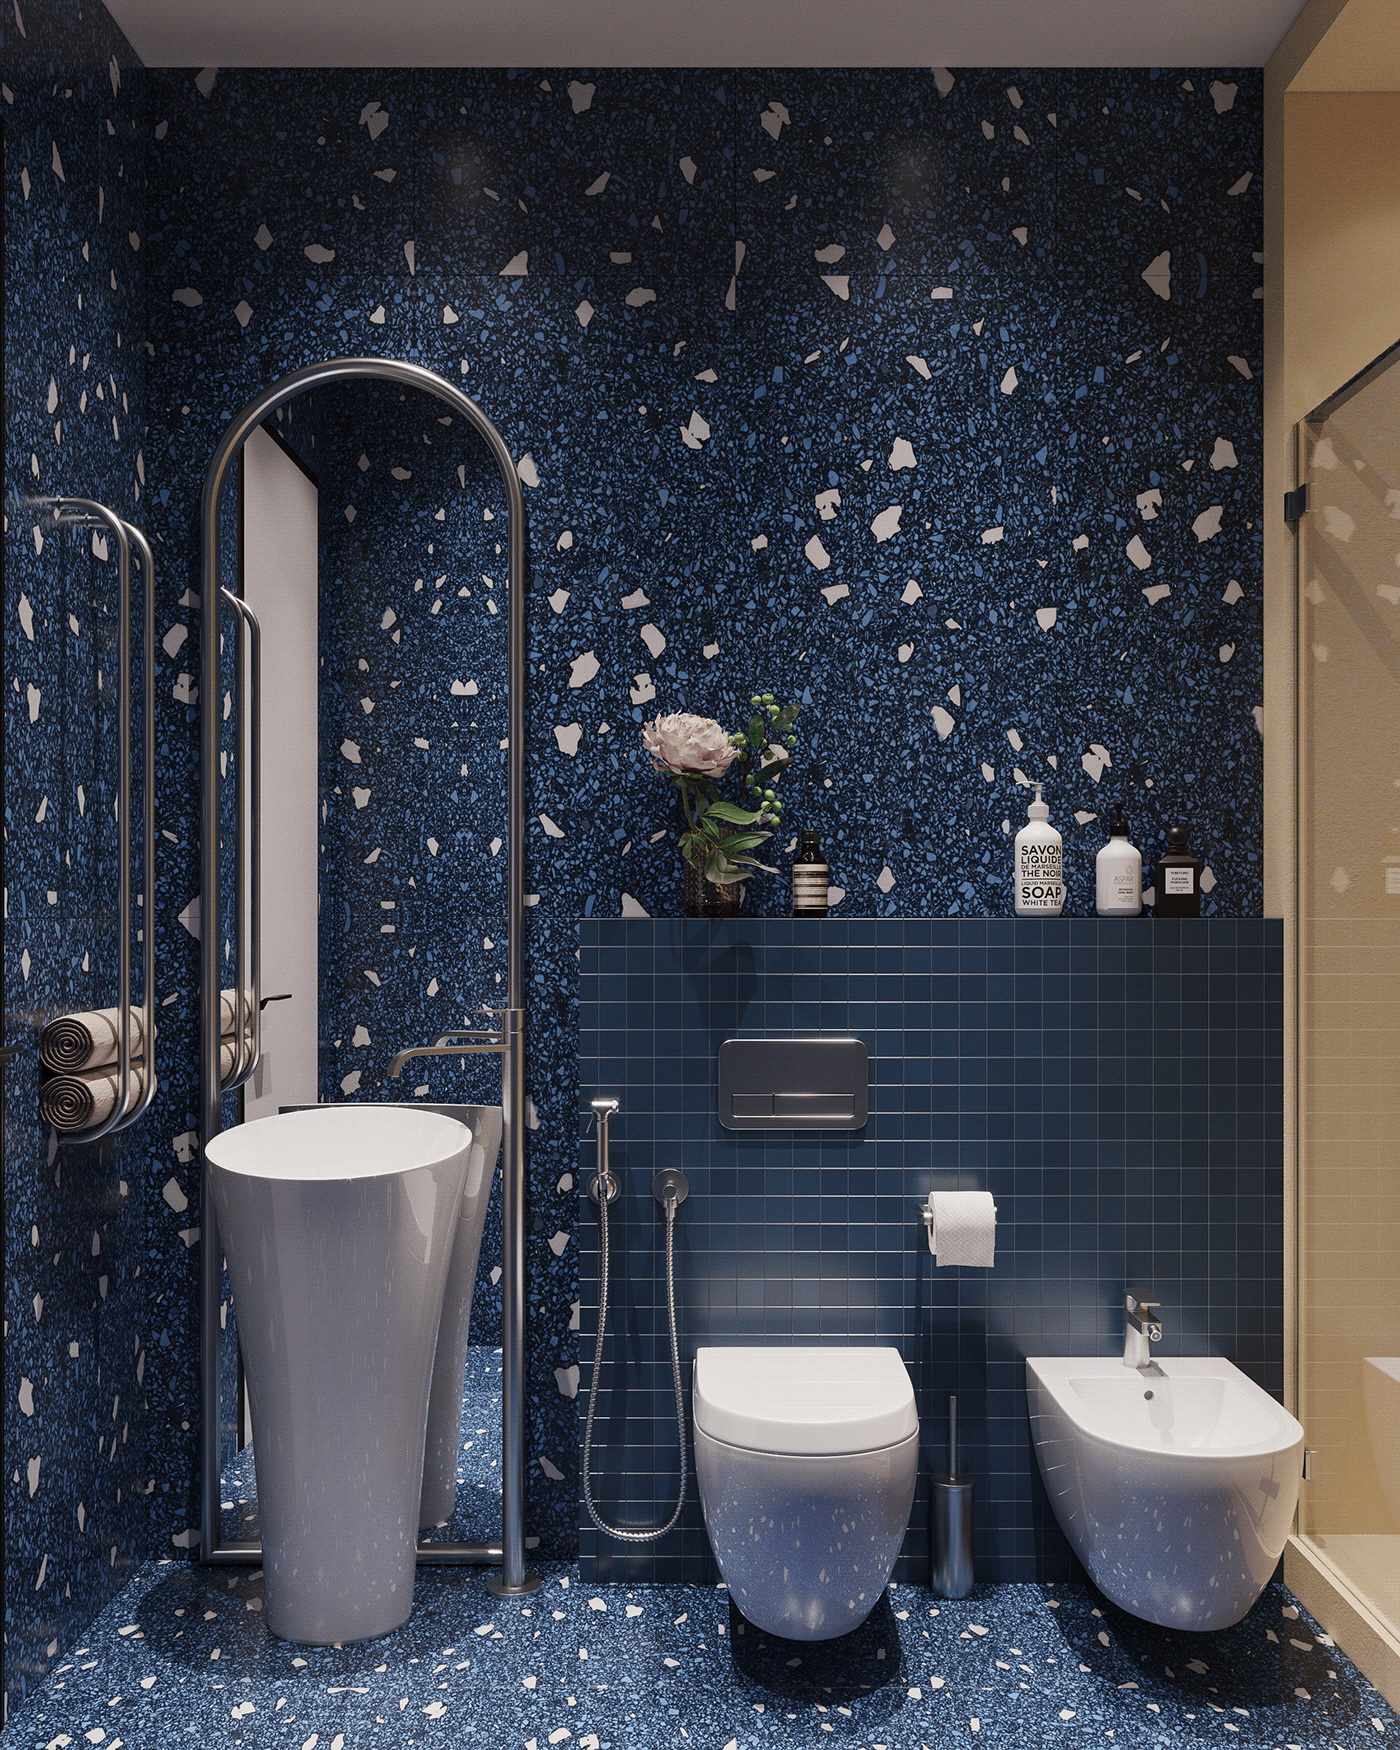 Blue and white tiles create a clean and fresh feeling.